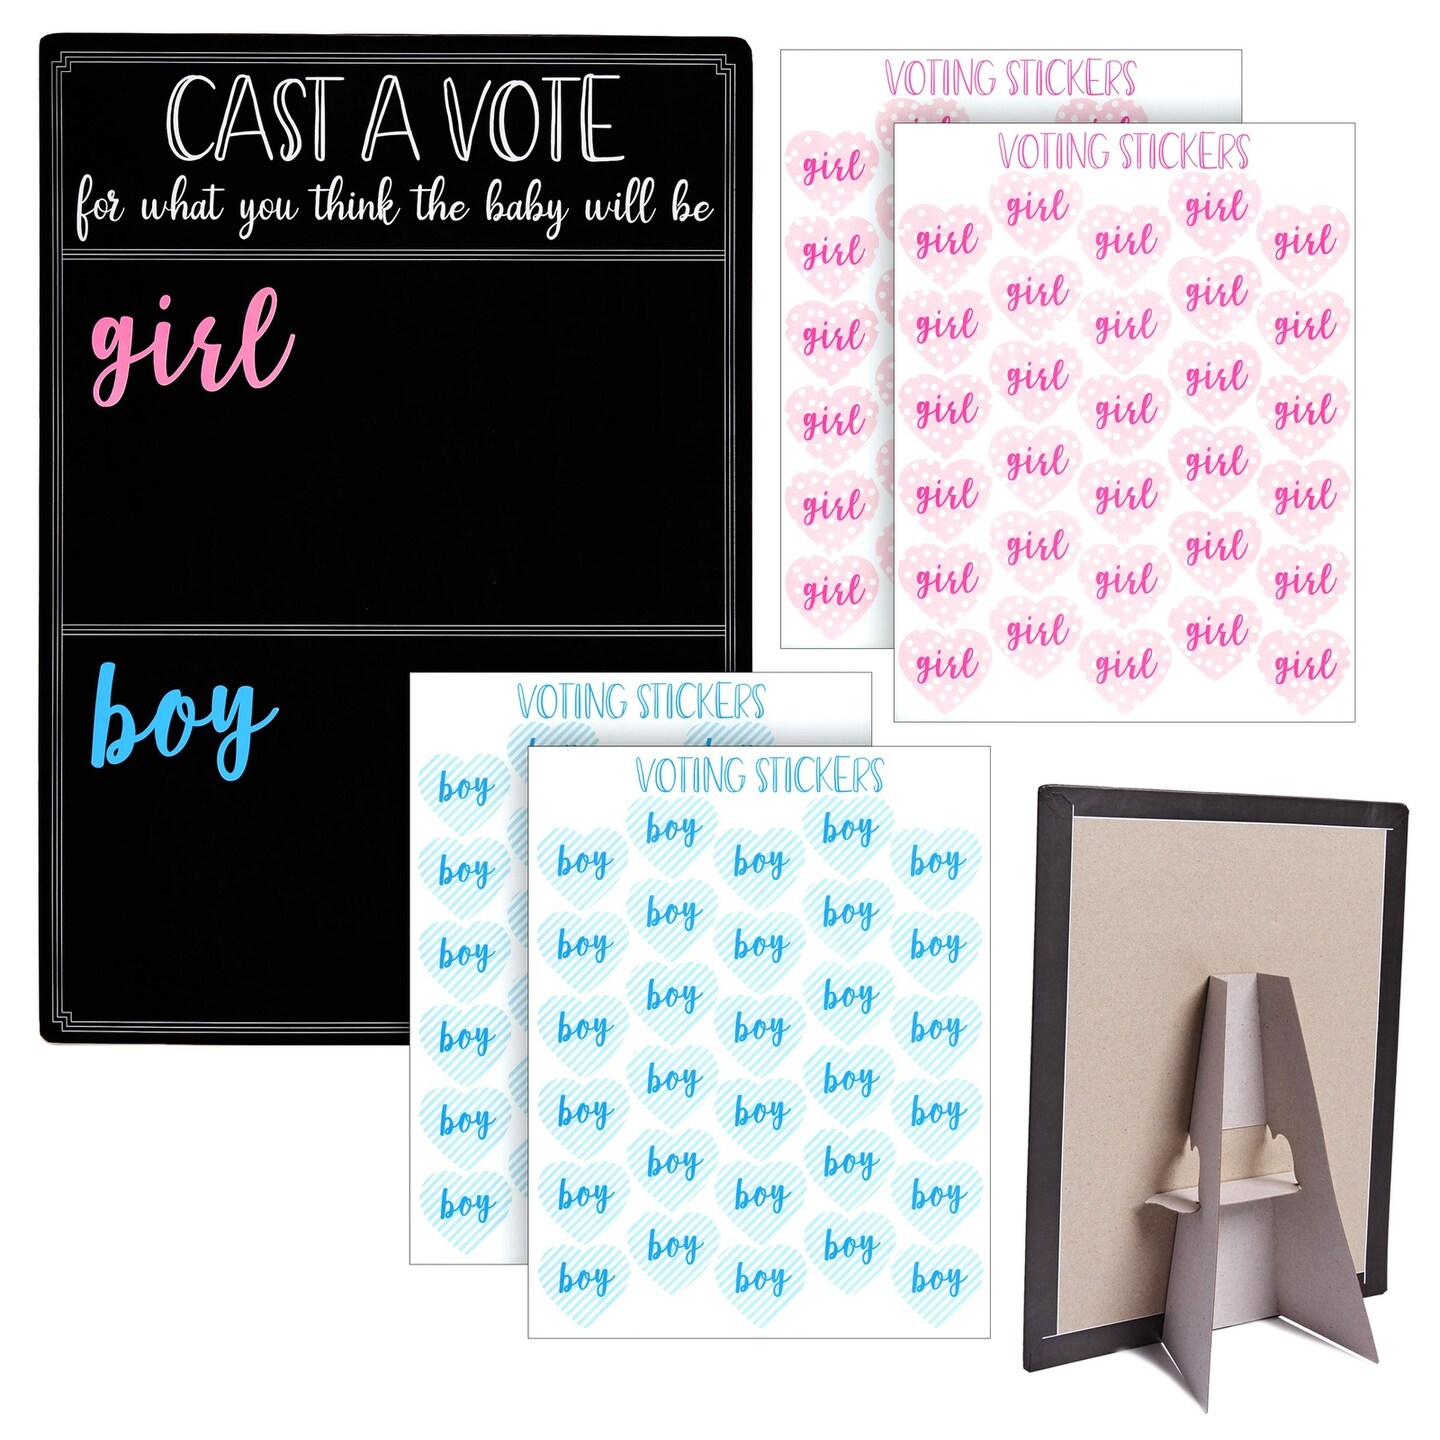 Gender Reveal Decorations for Baby Shower Games with 120 Girl or Boy Voting Stickers and Cast Your Vote Sign with Stand (Chalkboard Design, 12 x 17 In)